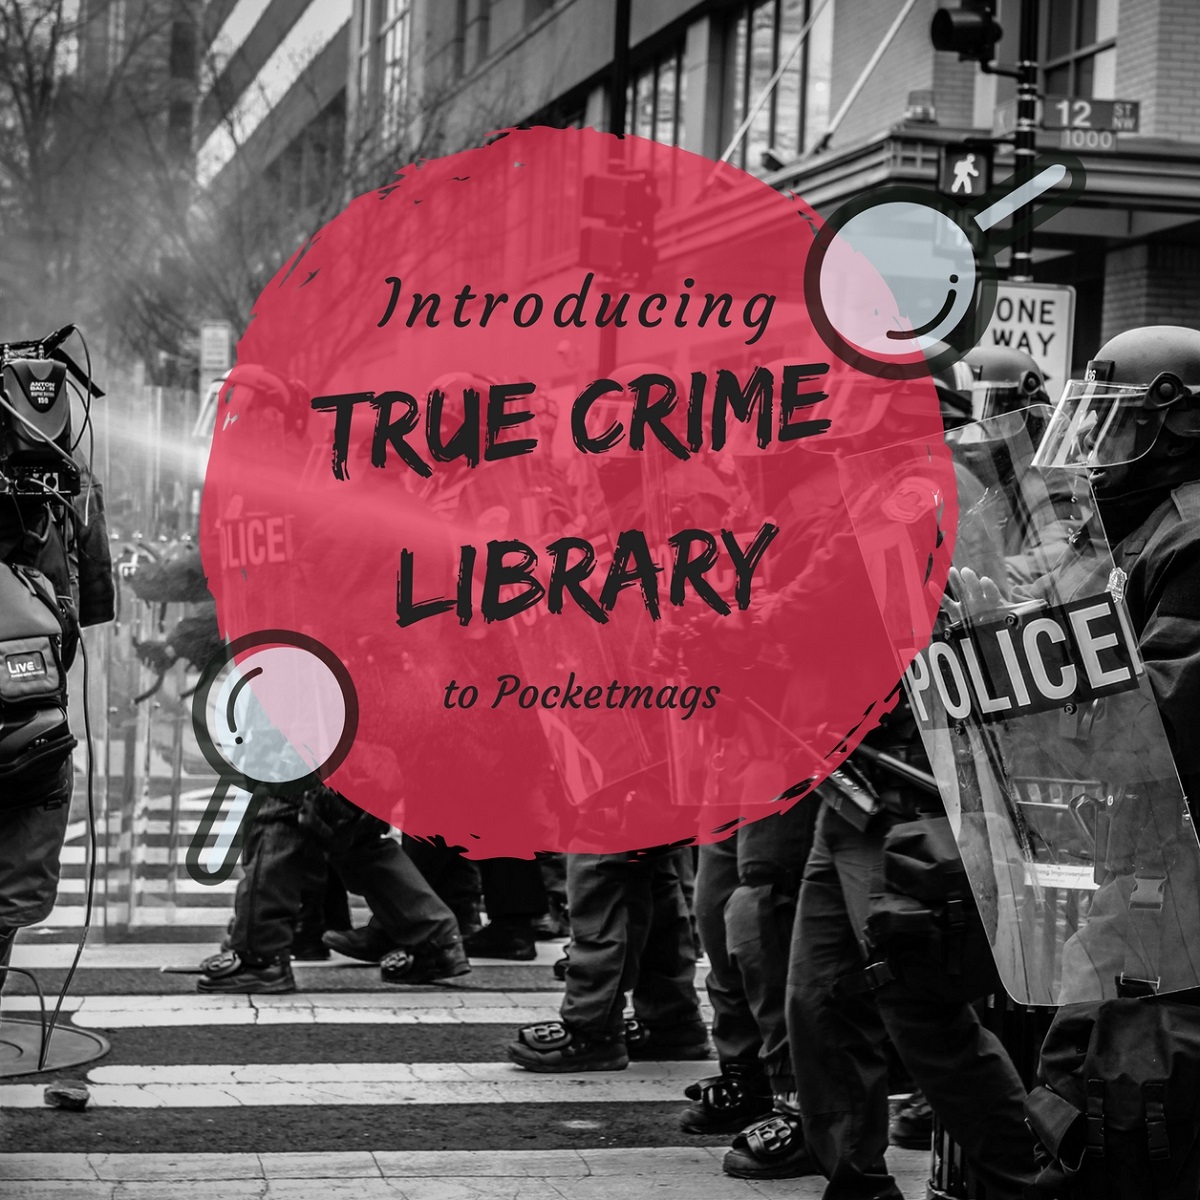 New to Pocketmags: True Crime Library